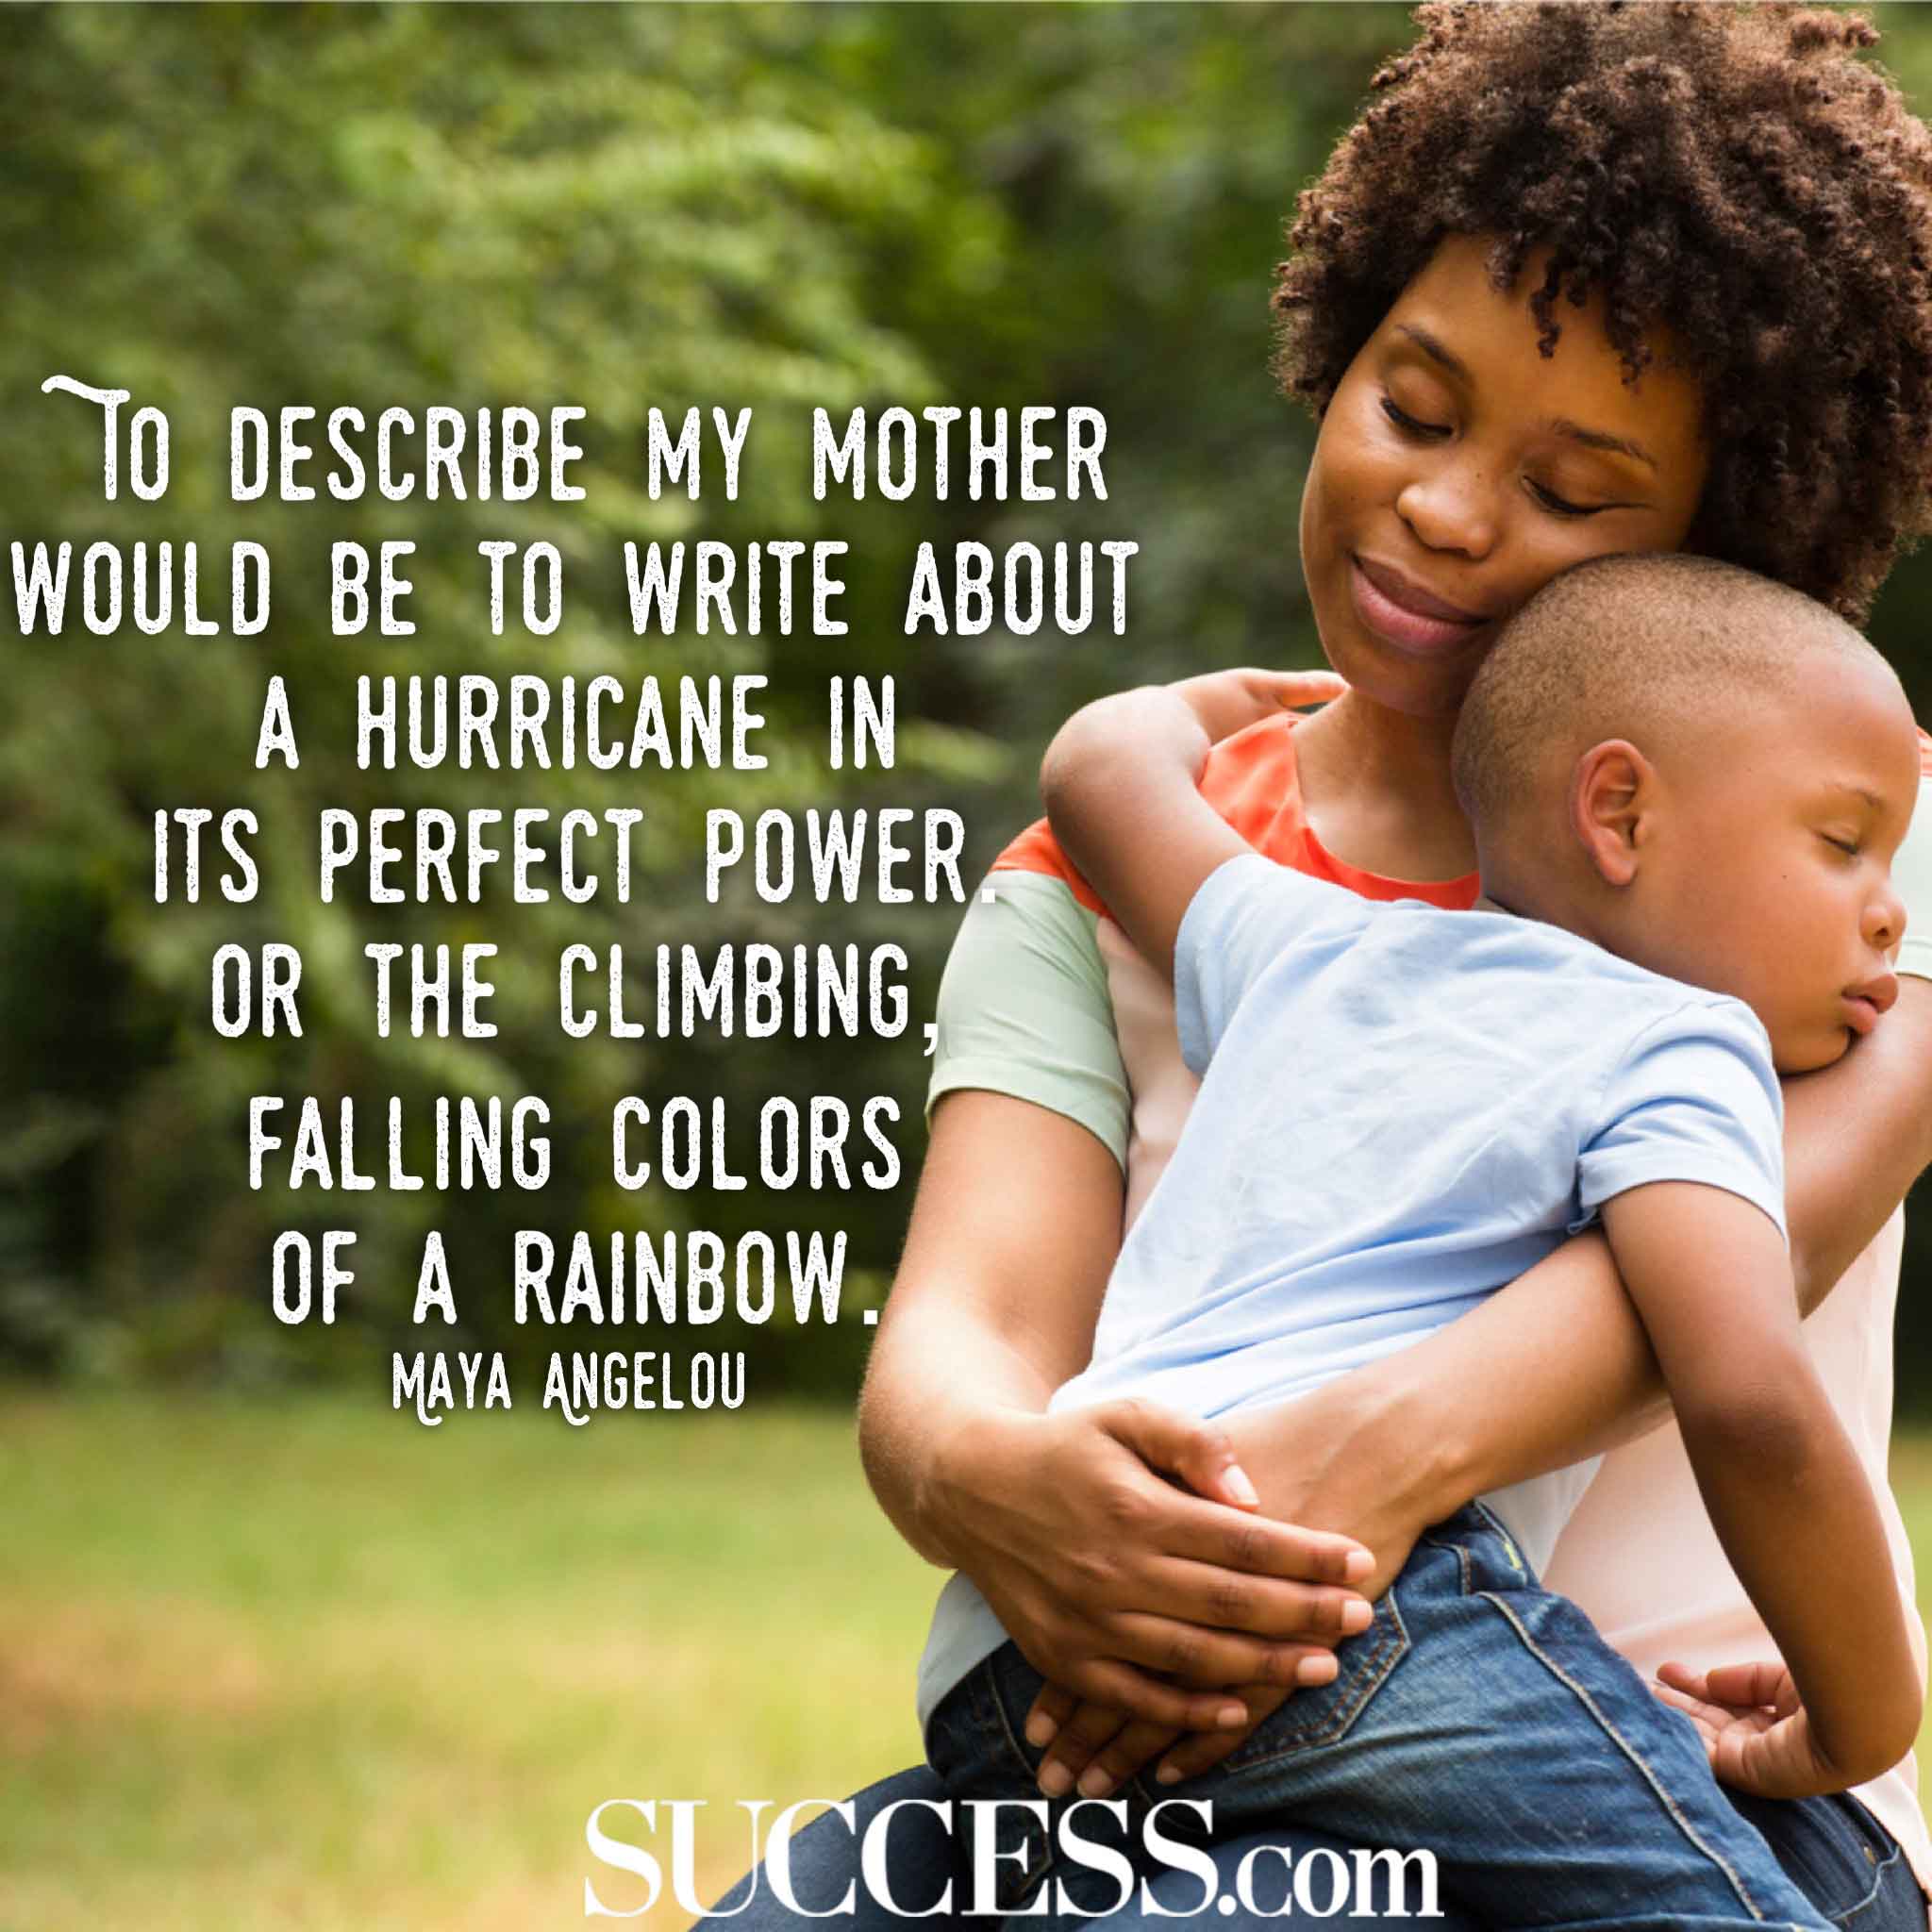 15 Loving Quotes About the Joys of Motherhood